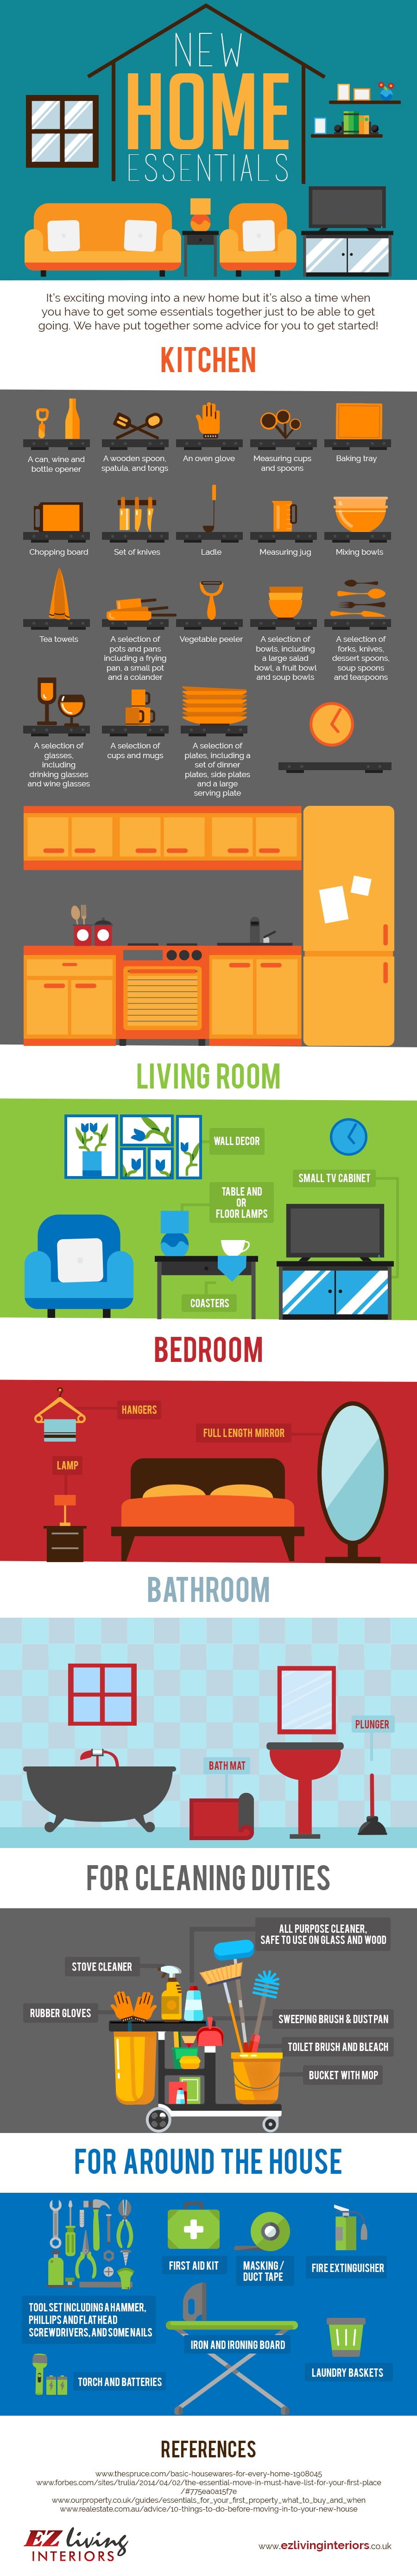 New Home Essentials - Infographic